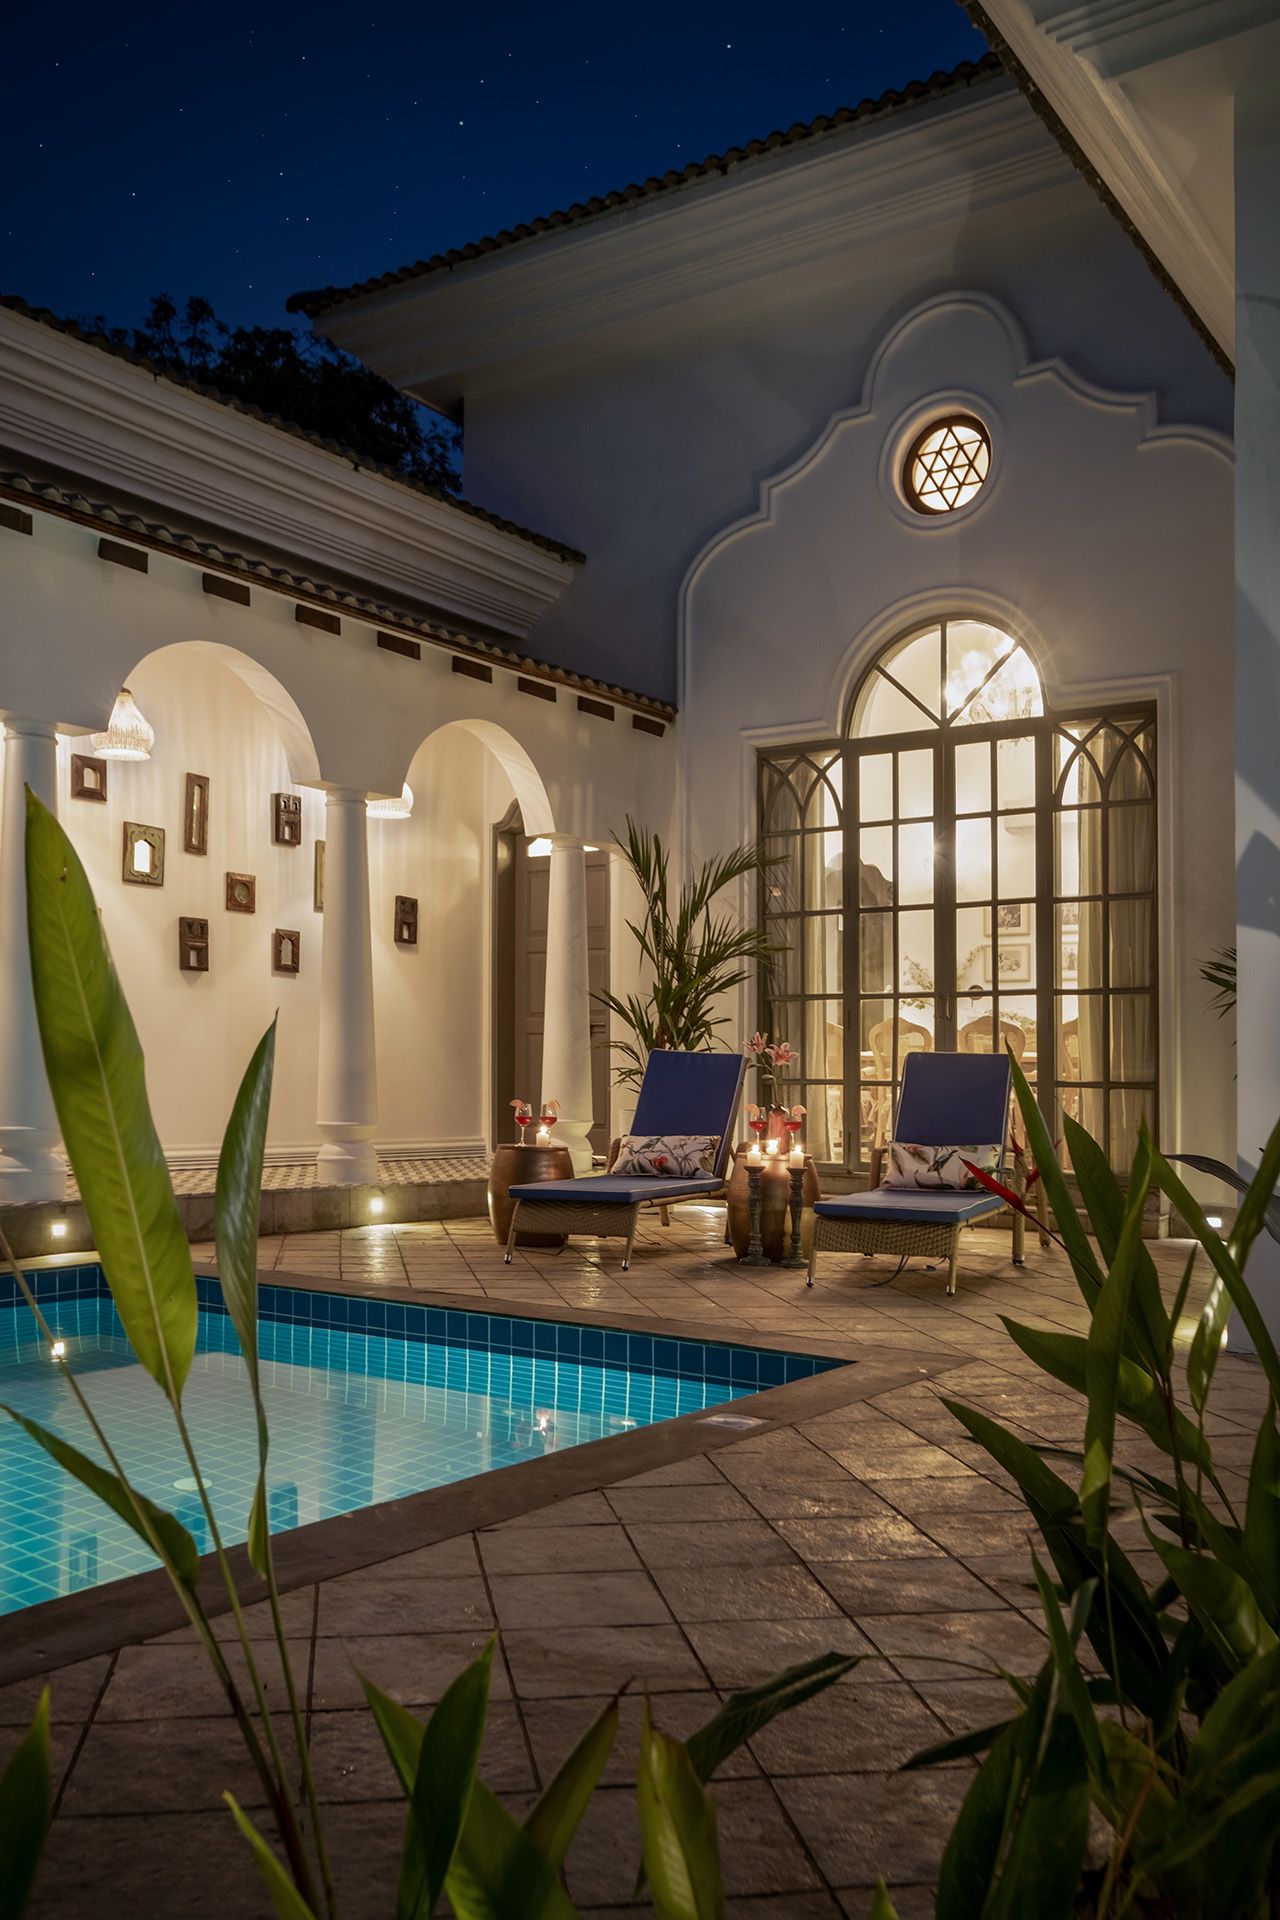 Maison 9 - Evening by the Pool